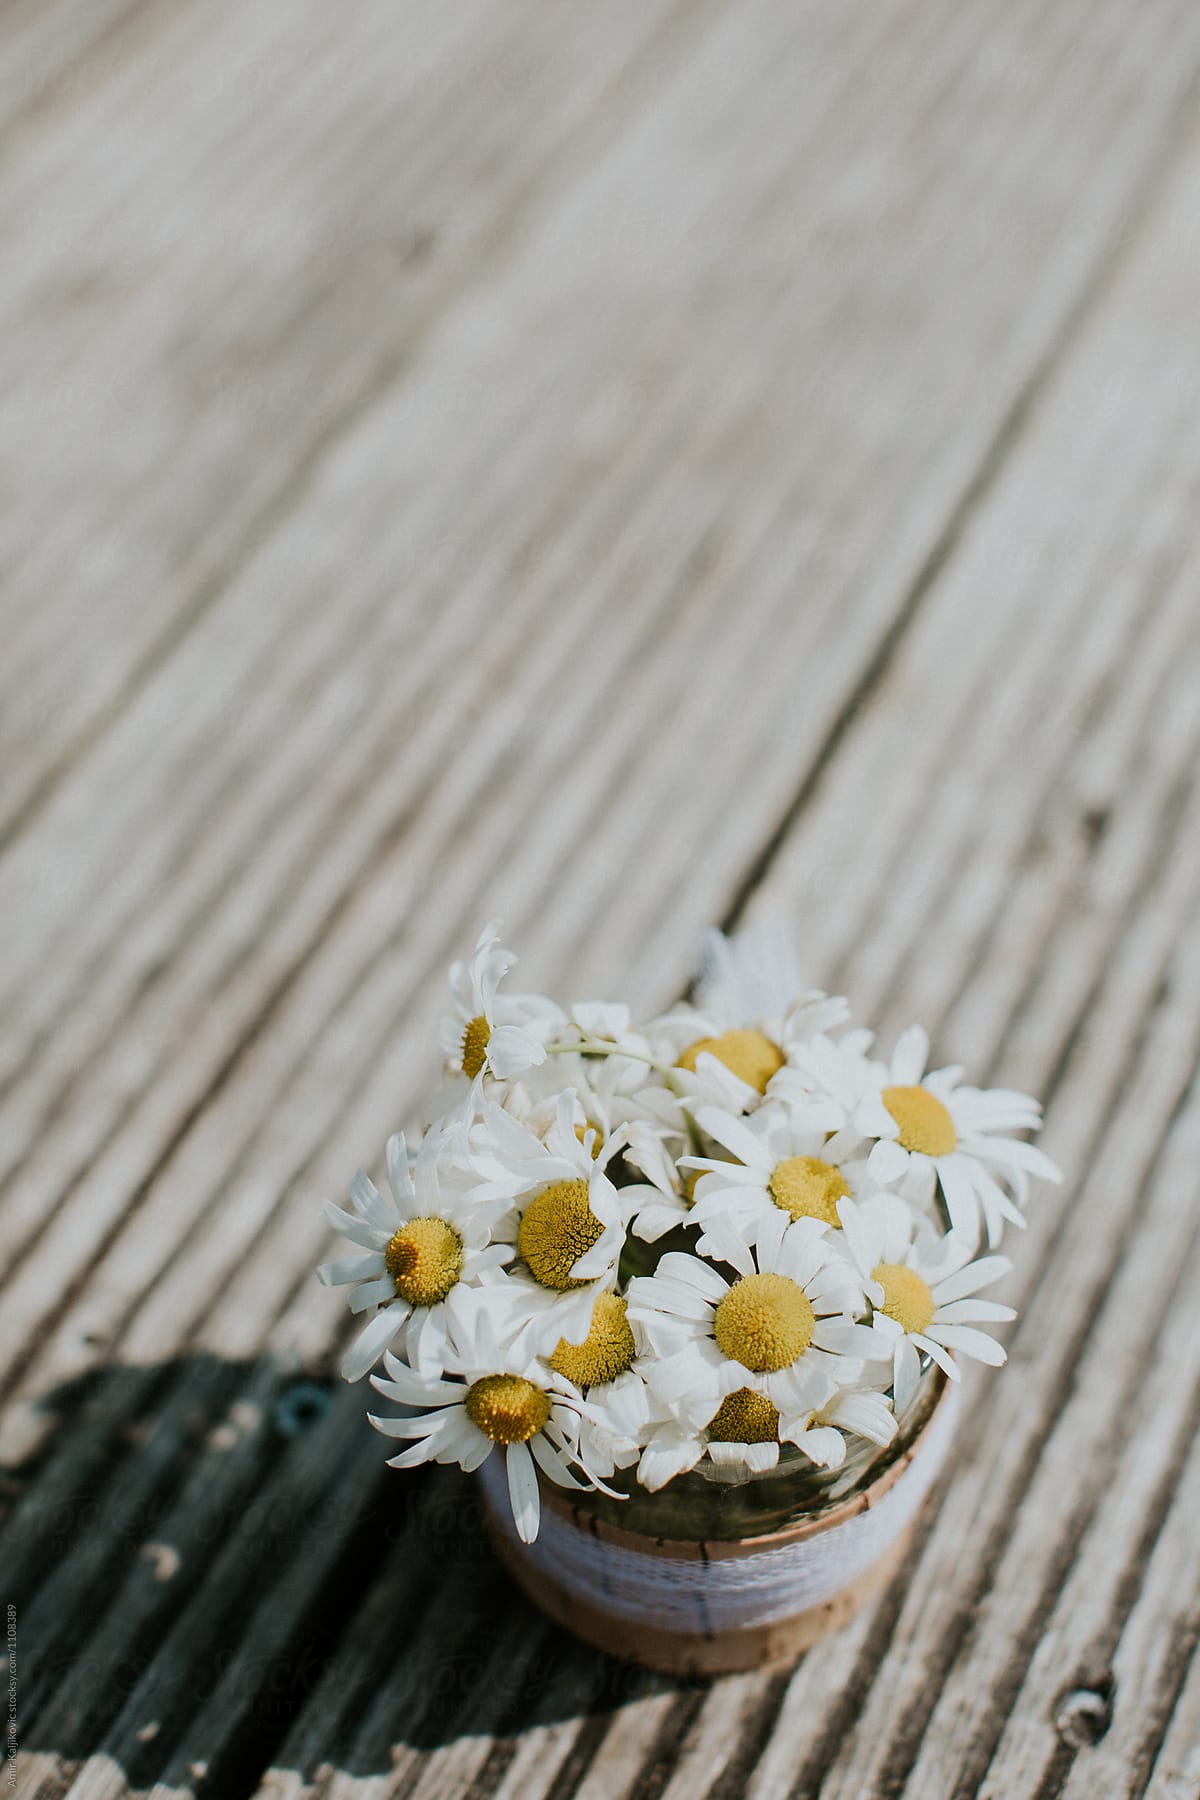 Little bowl of yellow and white flowers